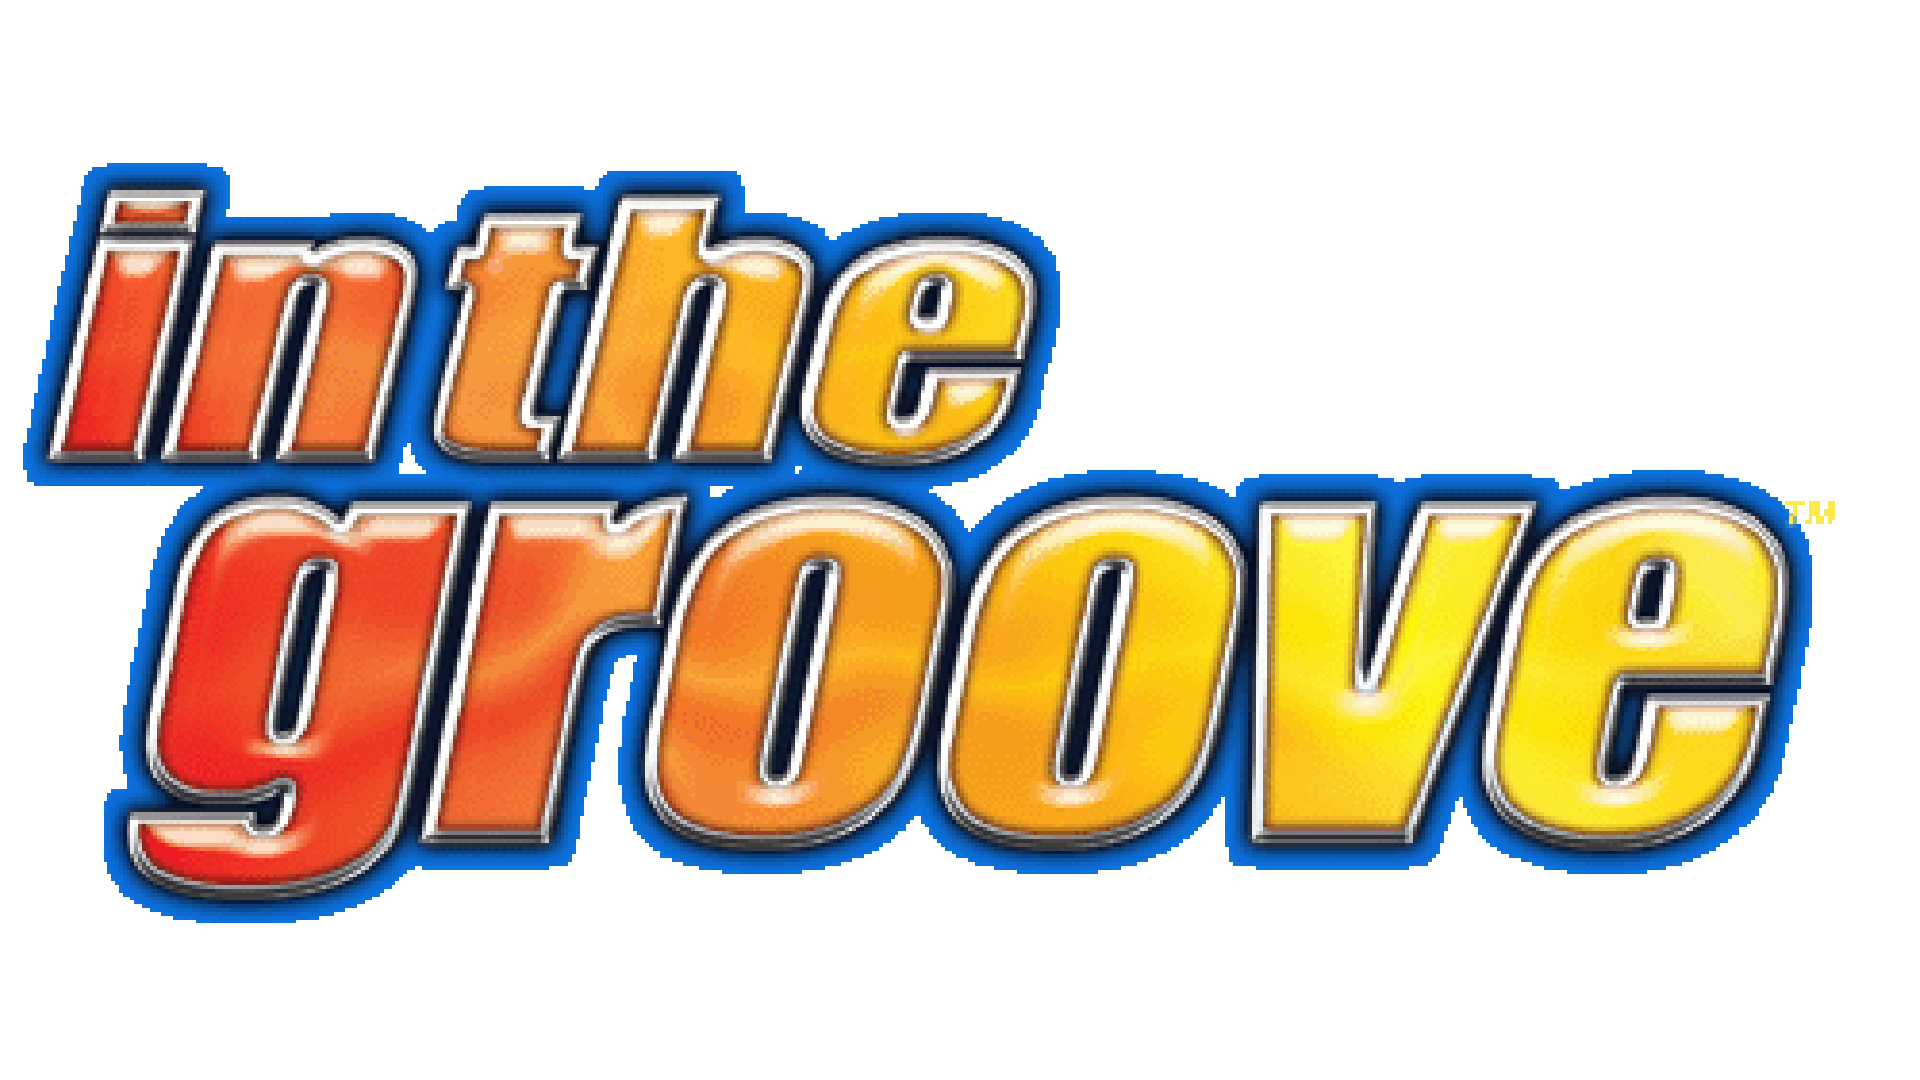 In The Groove Logo